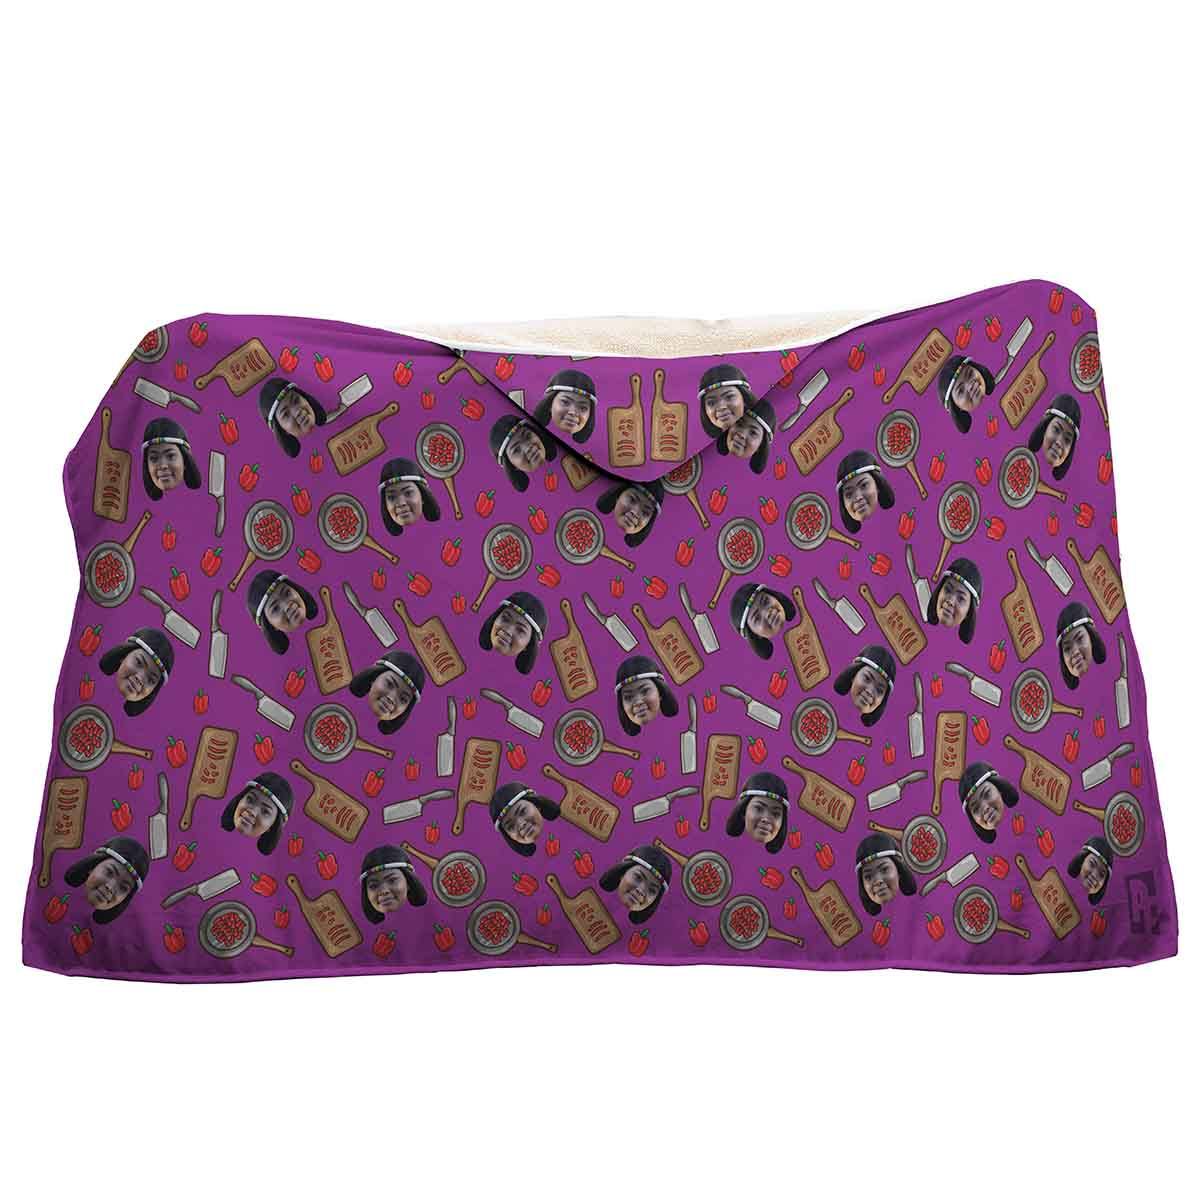 purple Сooking hooded blanket personalized with photo of face printed on it